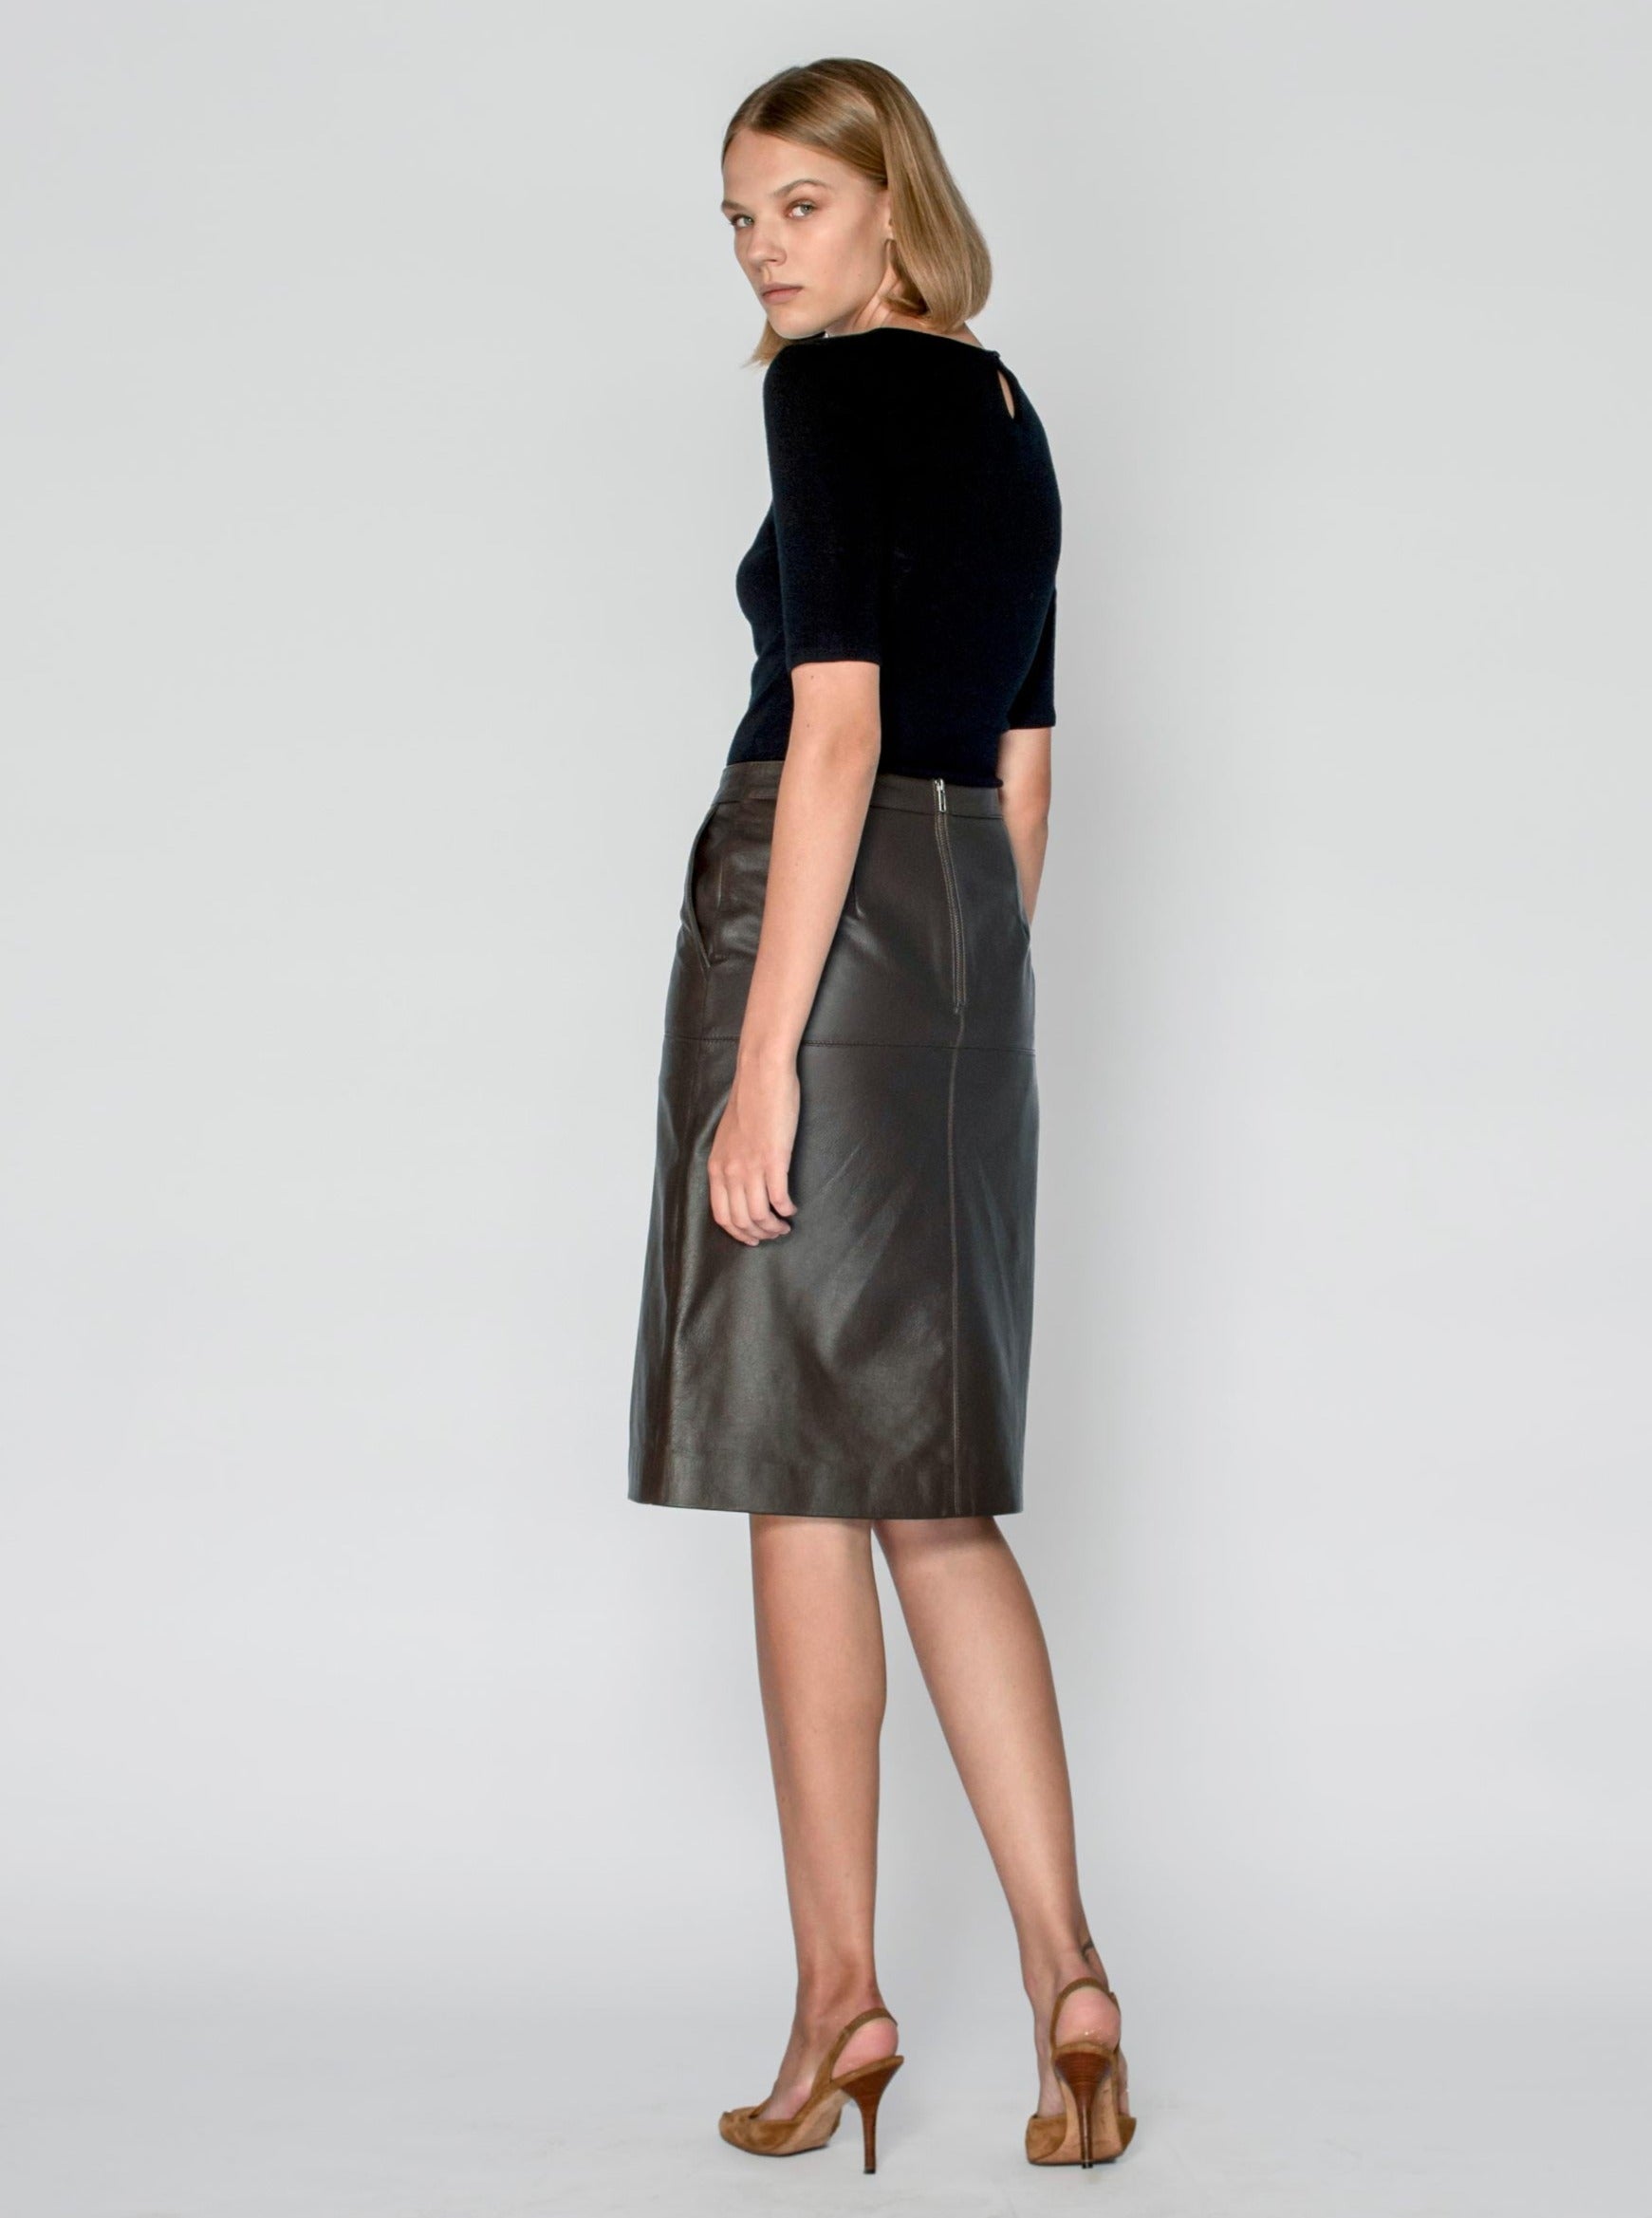  Cleo midi leather skirt in chocolate brown Cleo midi leather skirt in chocolate brown